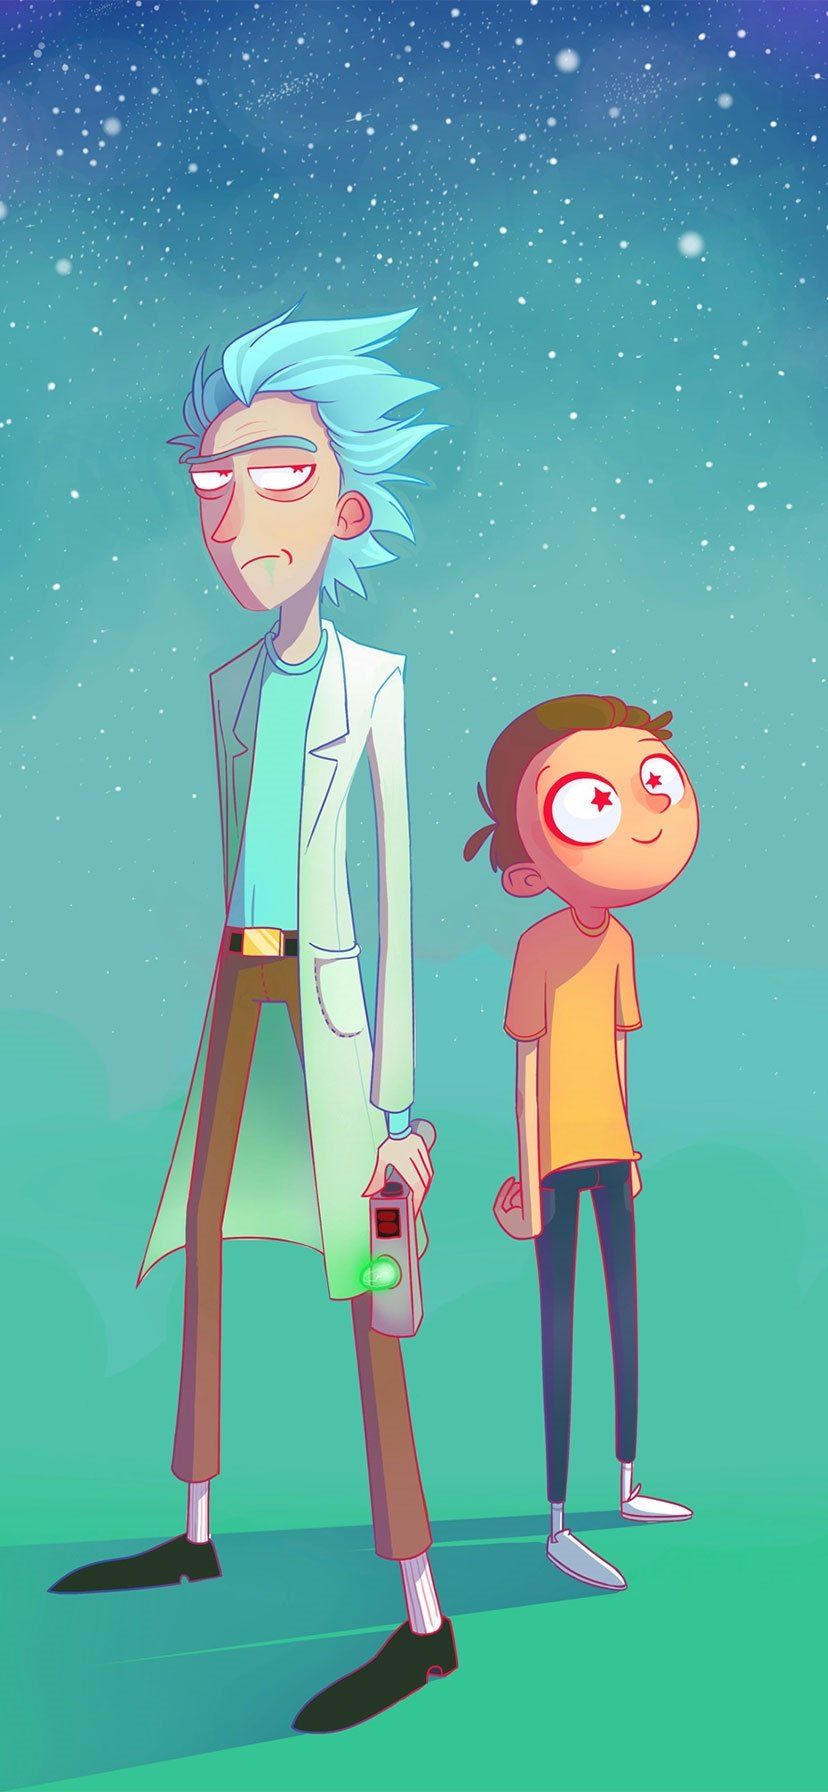 Rick and Morty Wallpaper iPhone Phone 4K #9180e